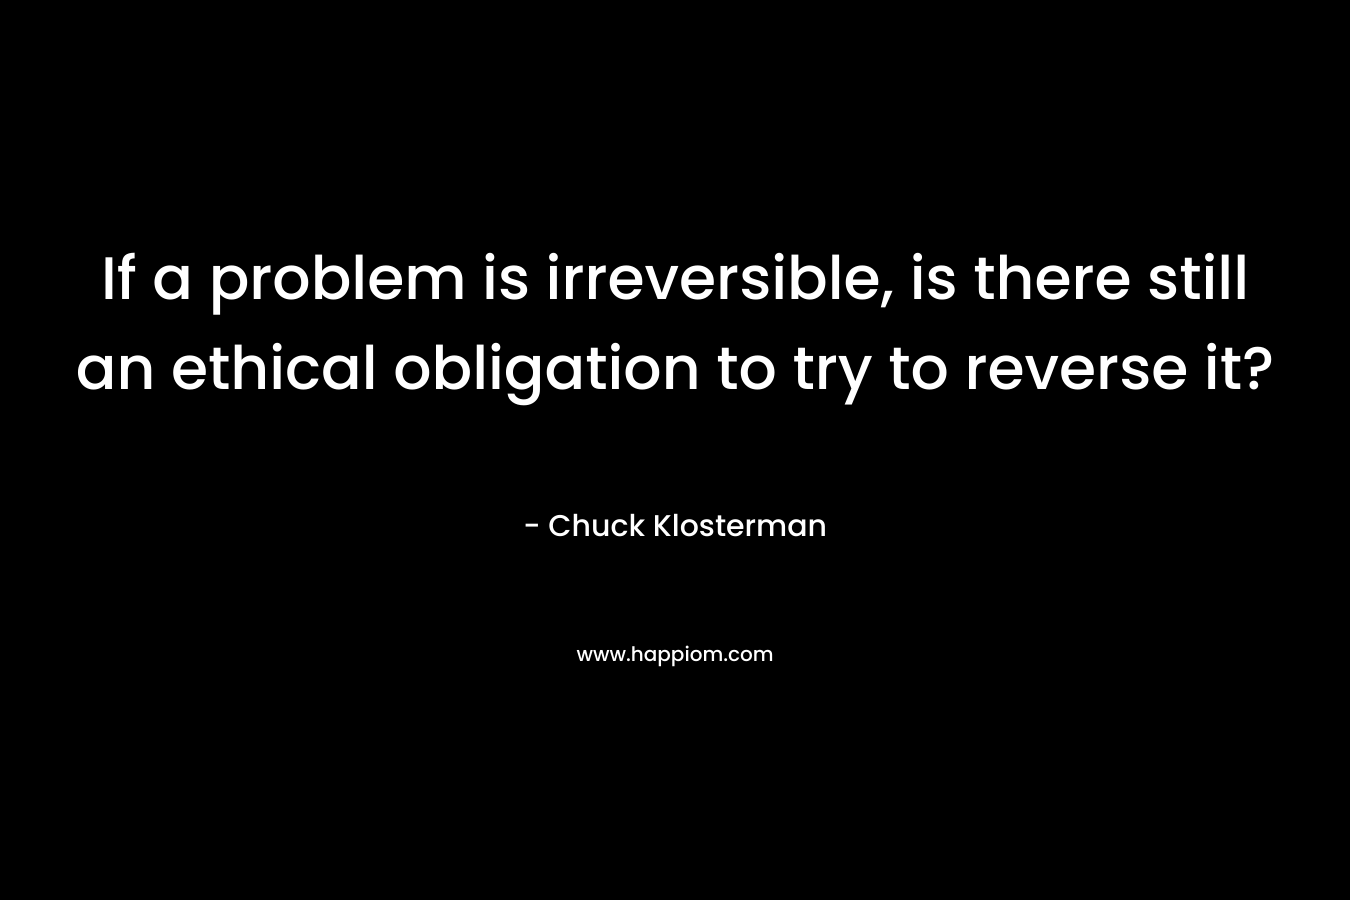 If a problem is irreversible, is there still an ethical obligation to try to reverse it? – Chuck Klosterman